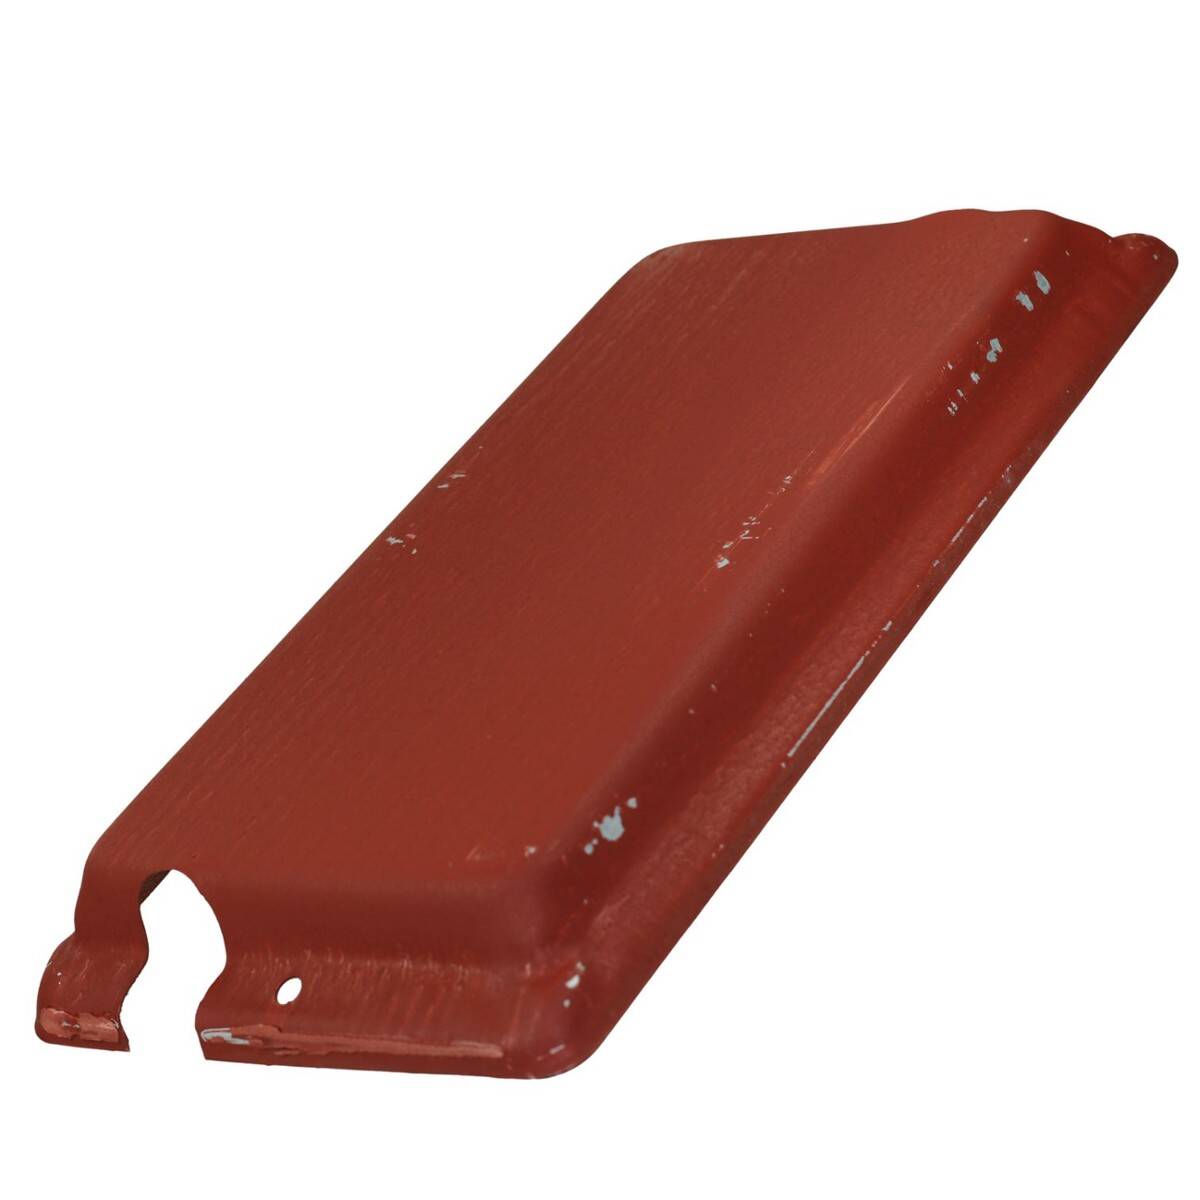 C-330 BATTERY COVER